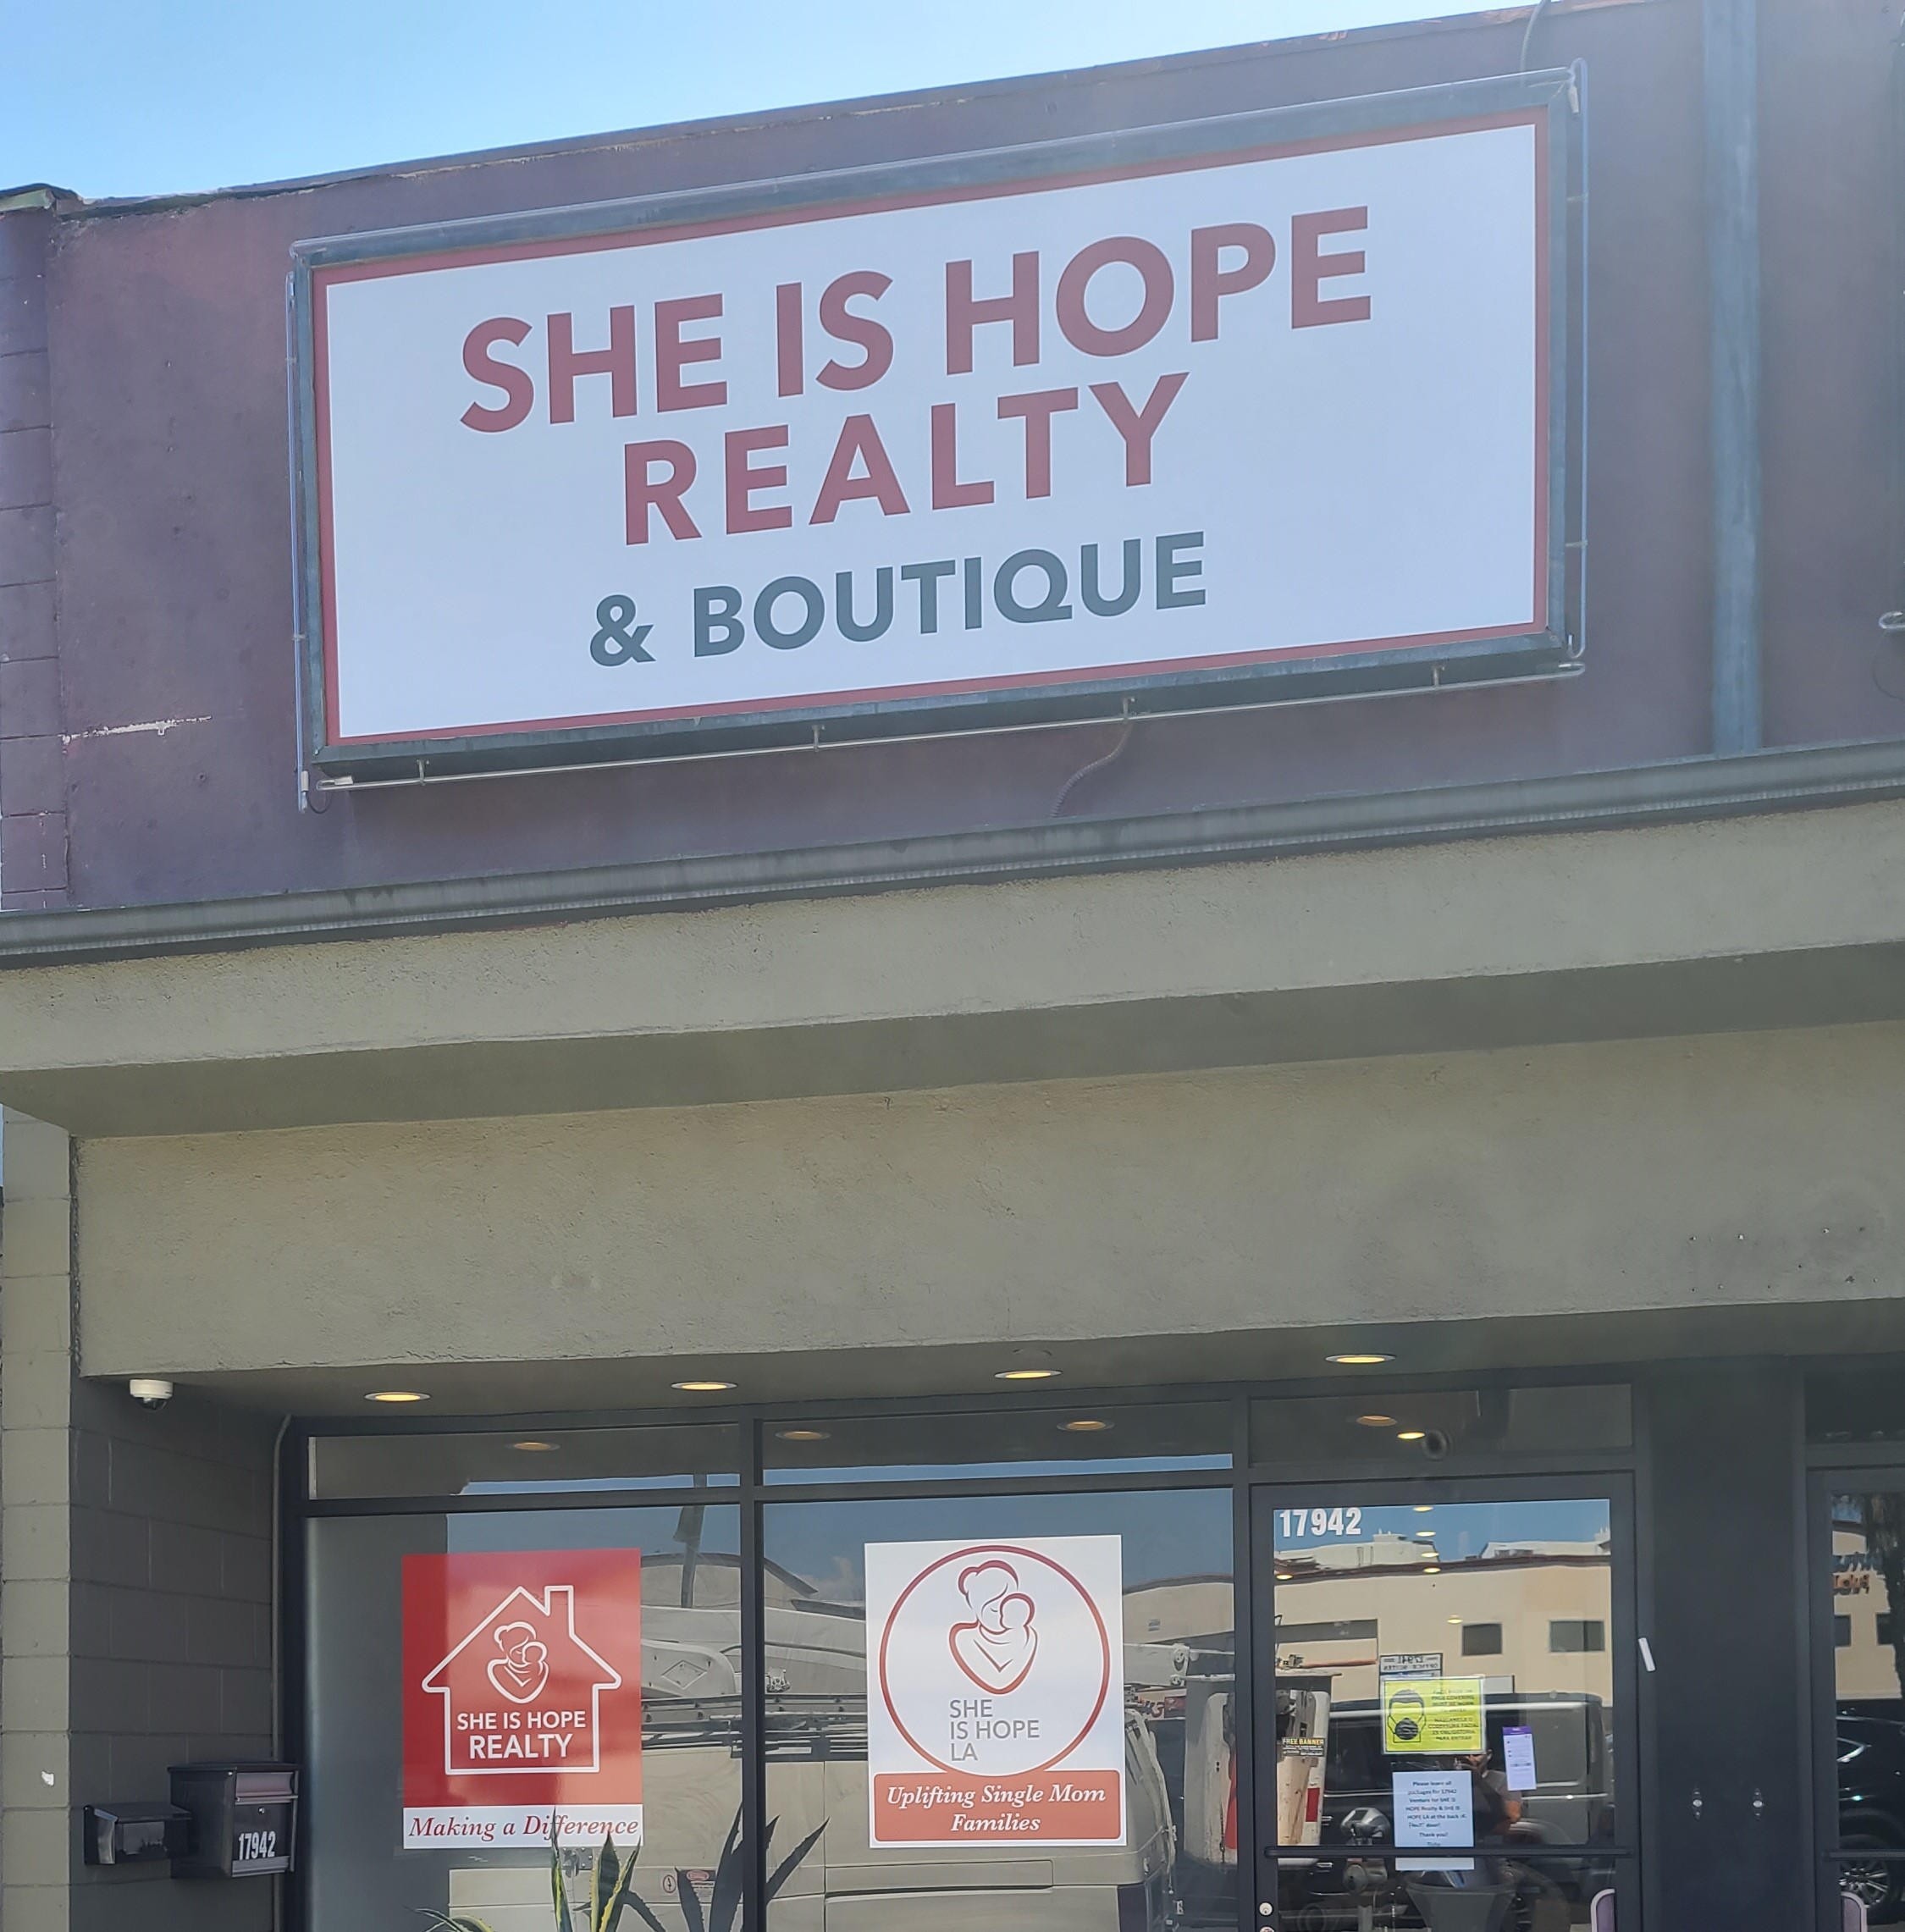 You are currently viewing She is Hope Realty & Boutique Lightbox Inserts in Encino